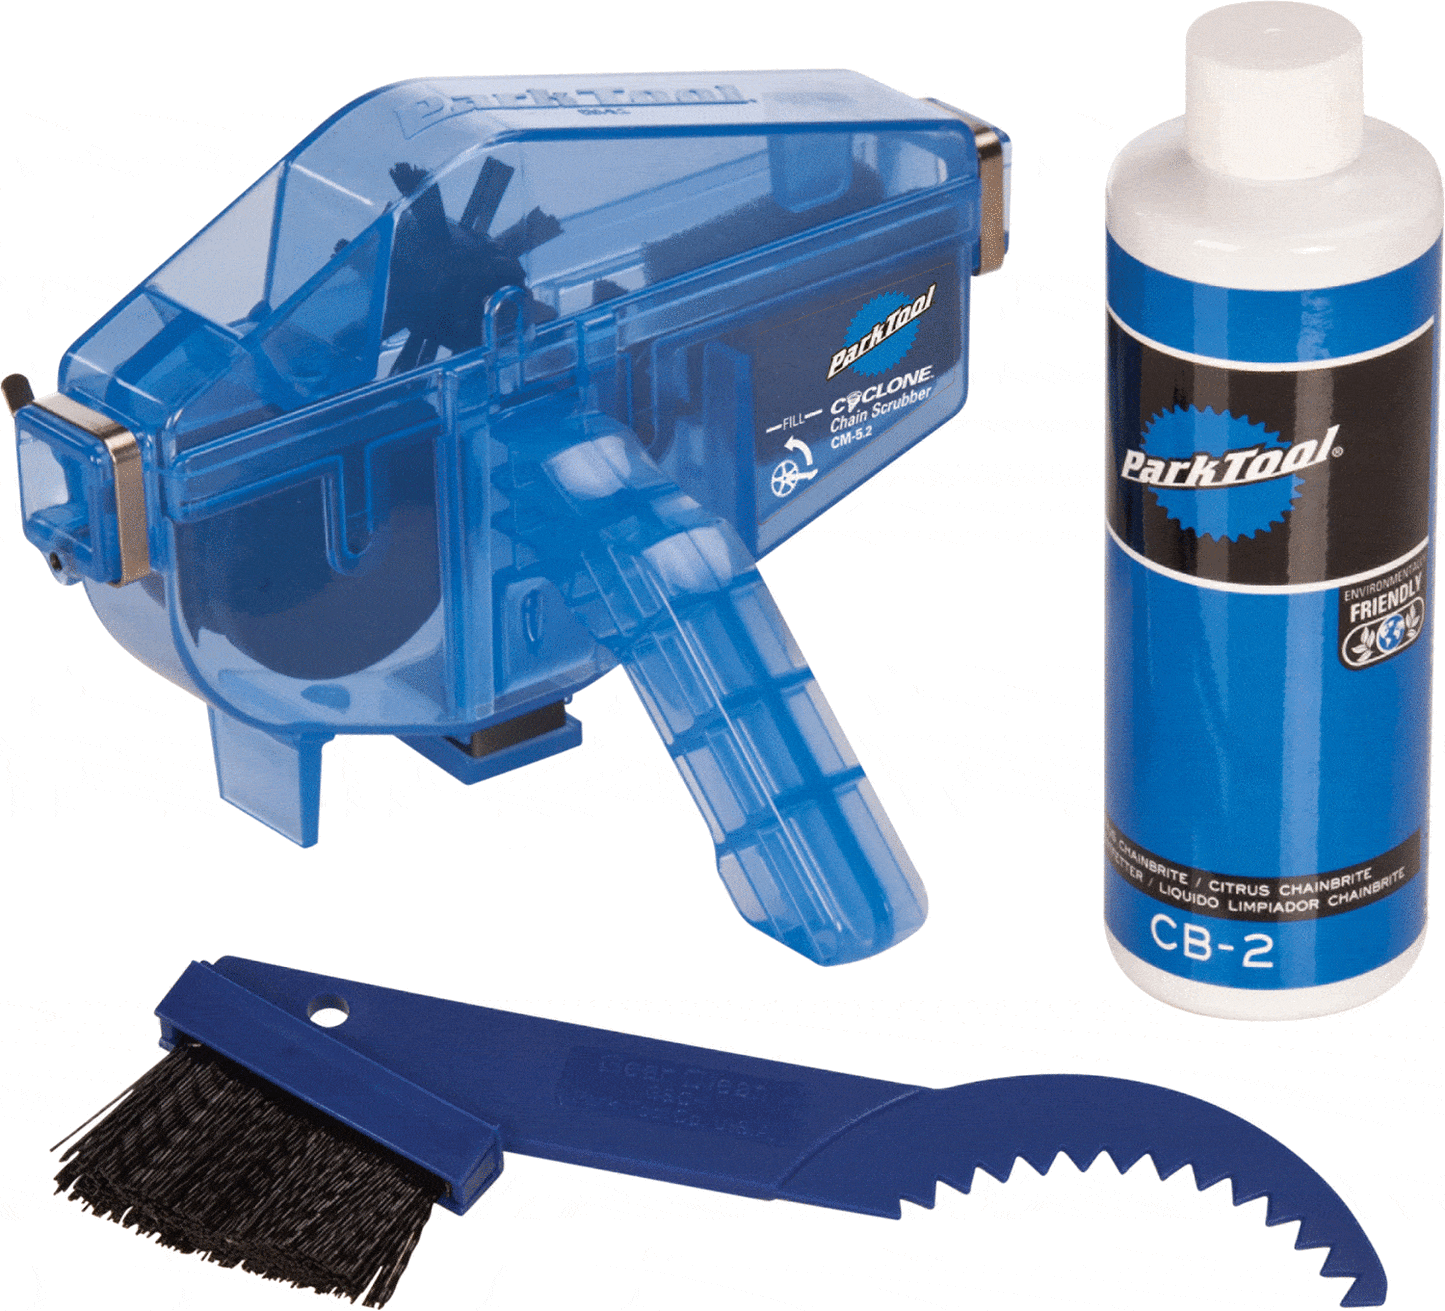 Cleaning Kit CG-2.4 Park Tool Cleaners 